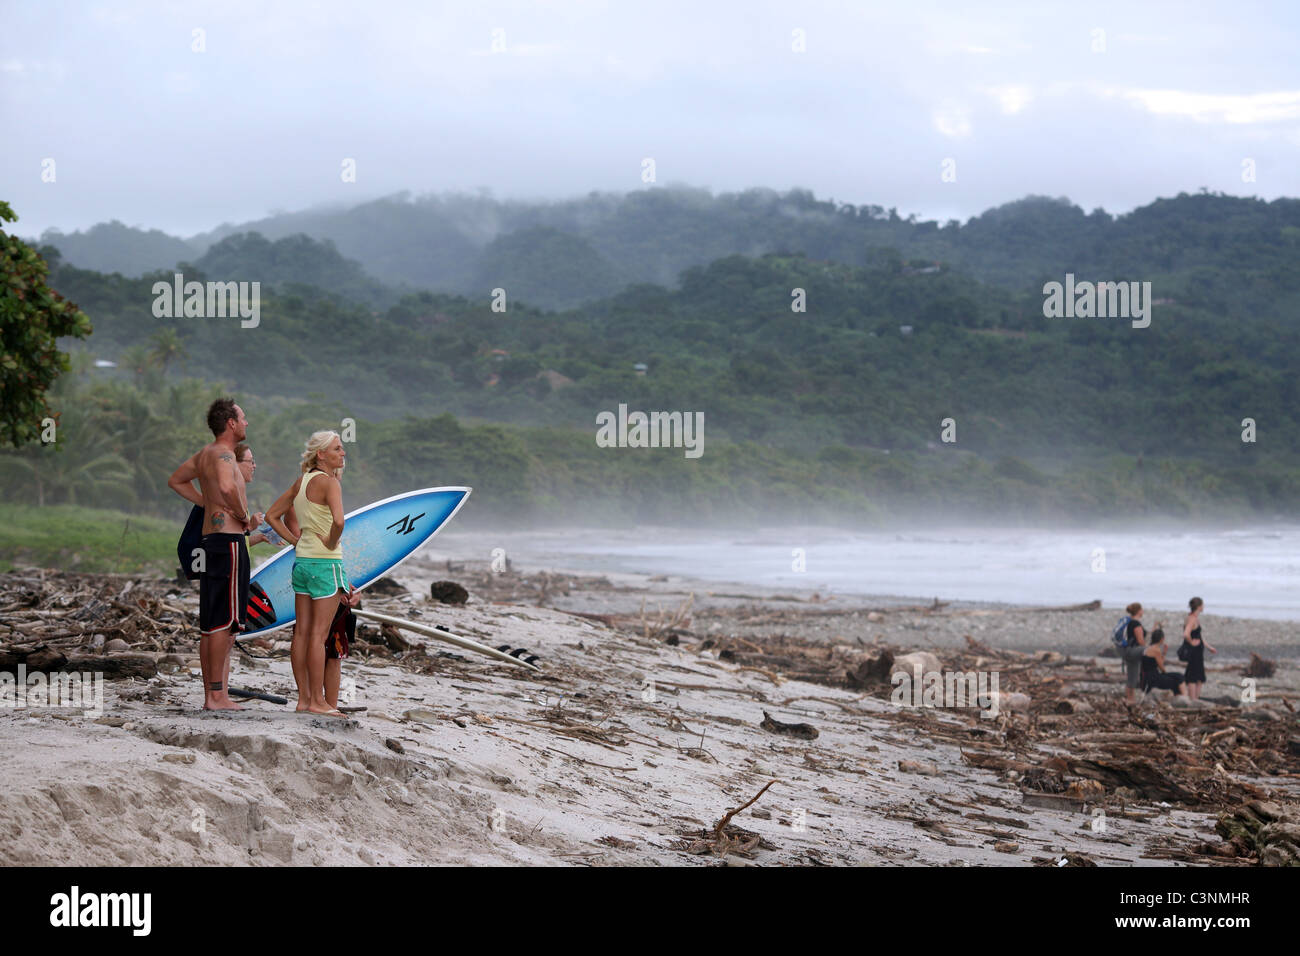 A group of travelers stand on the beach looking at the waves in Puntarenas, Costa Rica. Stock Photo